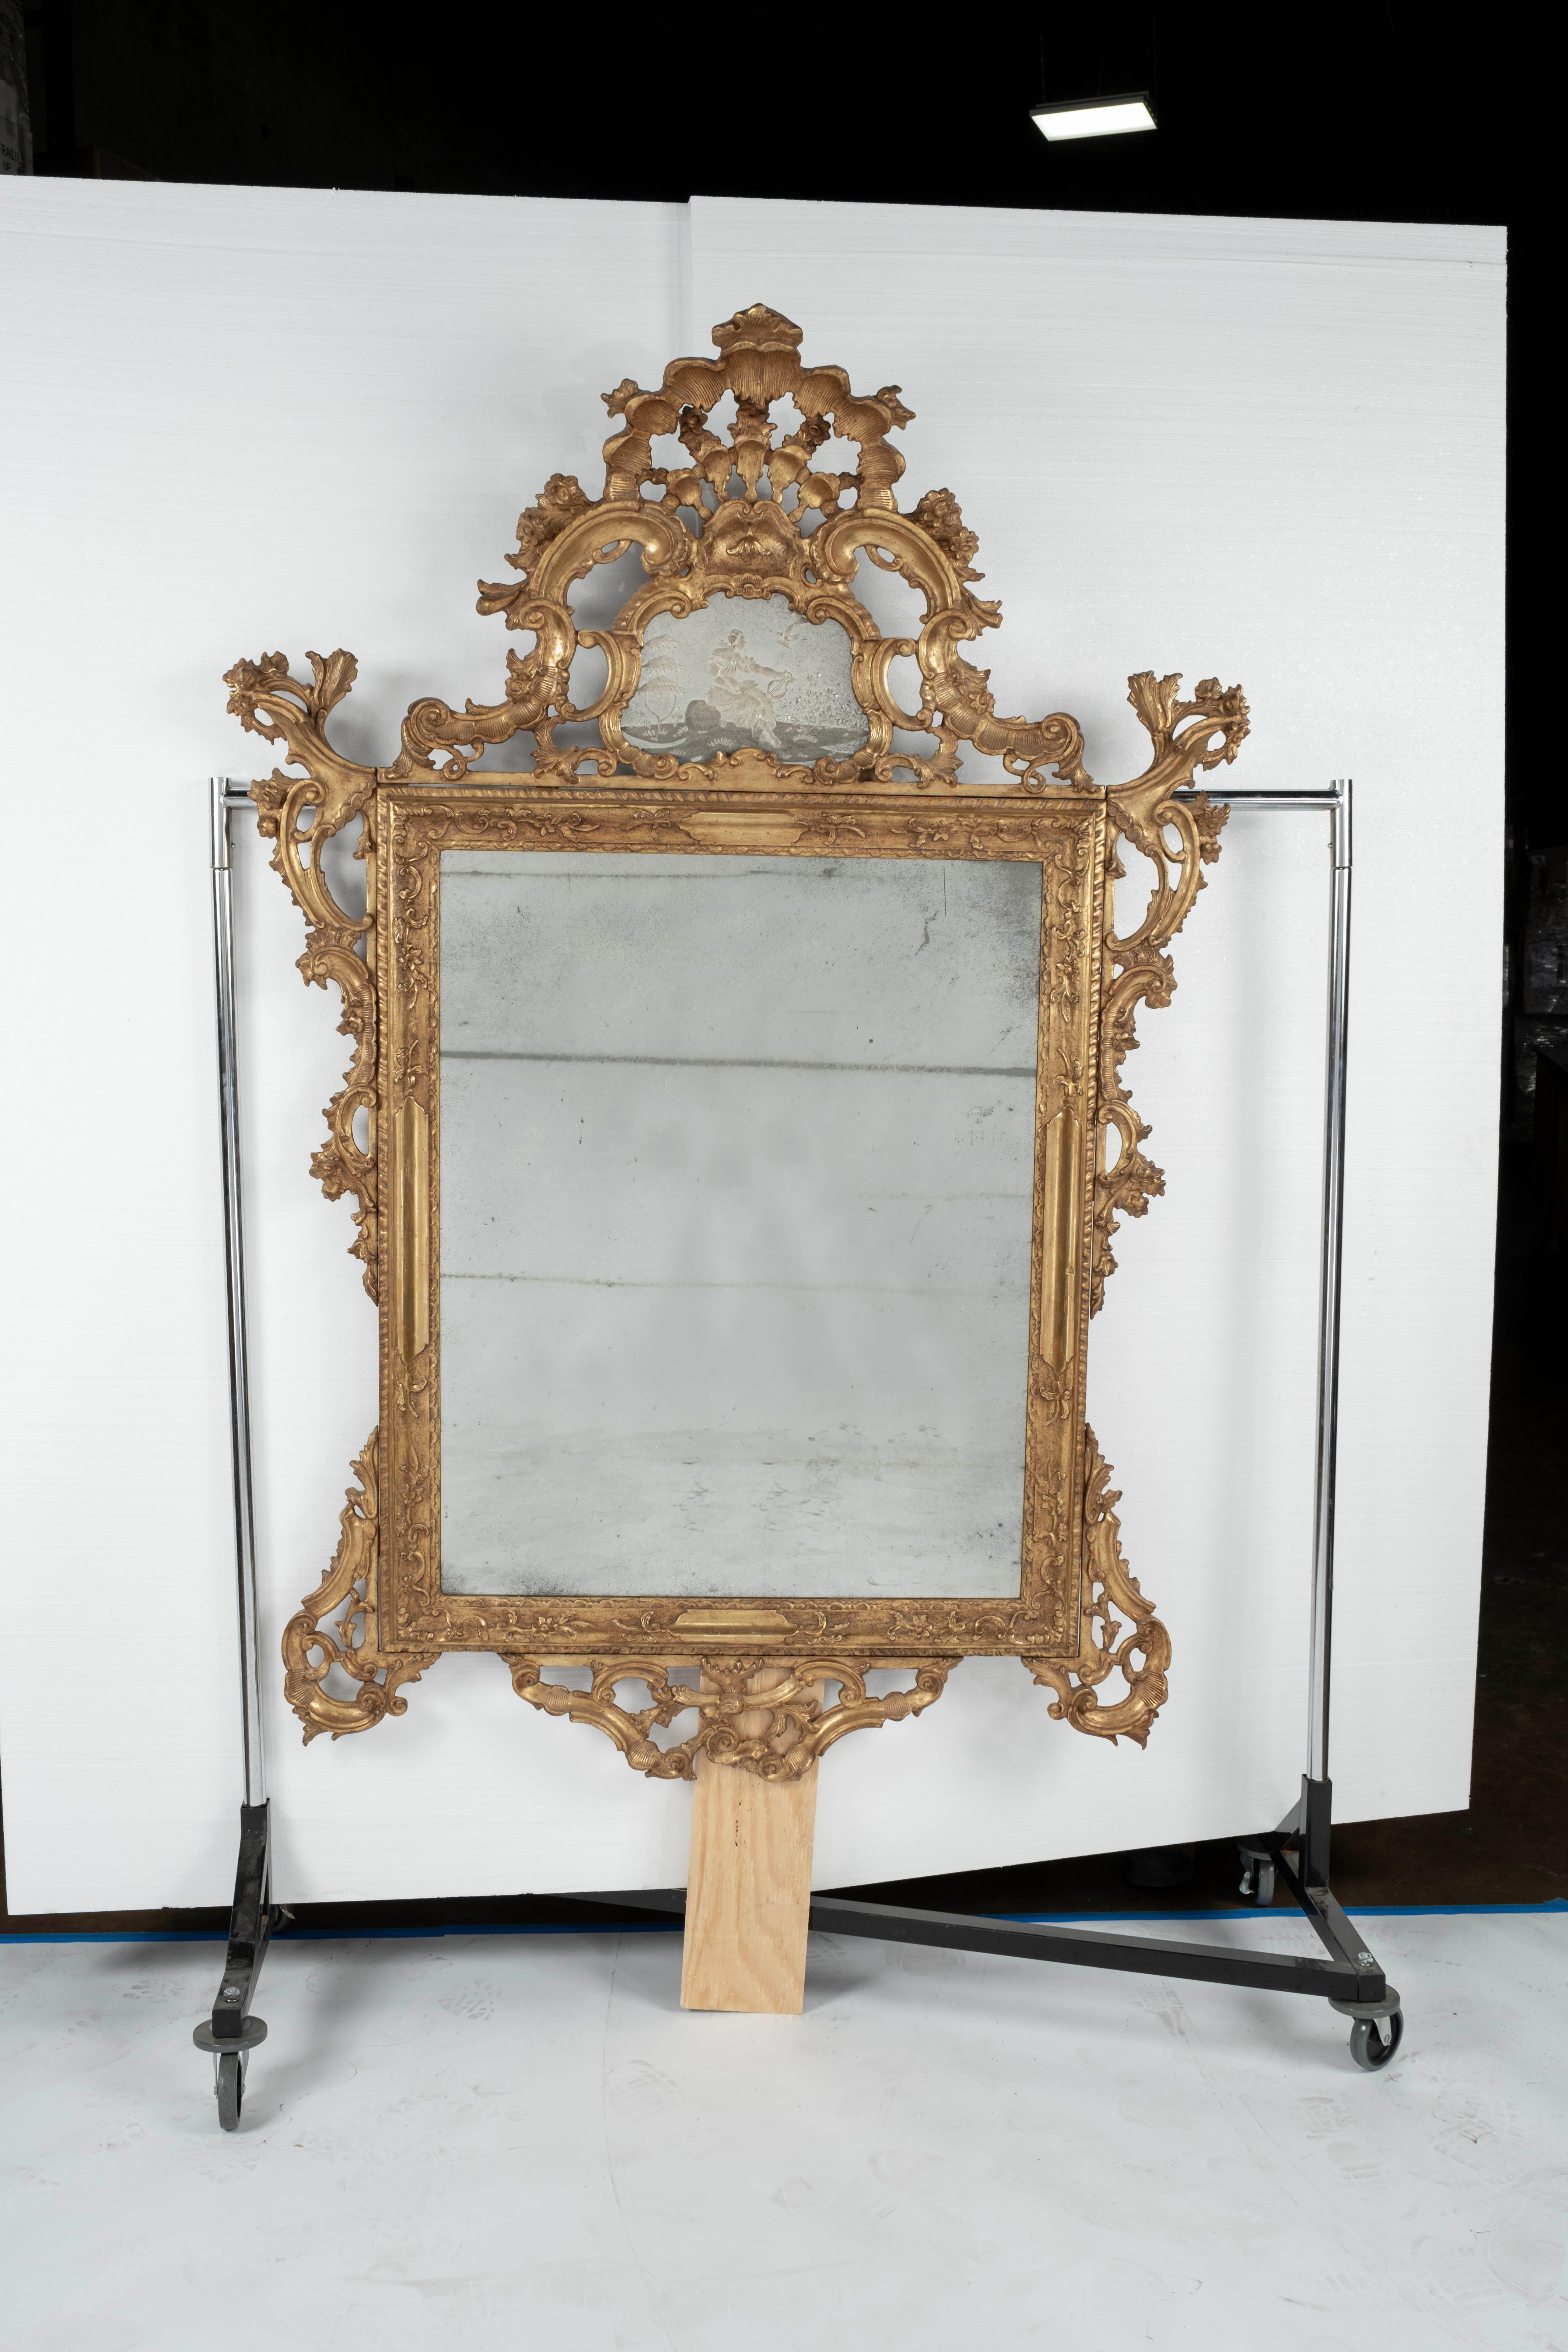 Louis XIV style carved and gilded mirror with etched glass inset
depicting a woman playing a lyre surrounded by a pierced shell-shaped
crest. Oxidized glass is age appropriate.